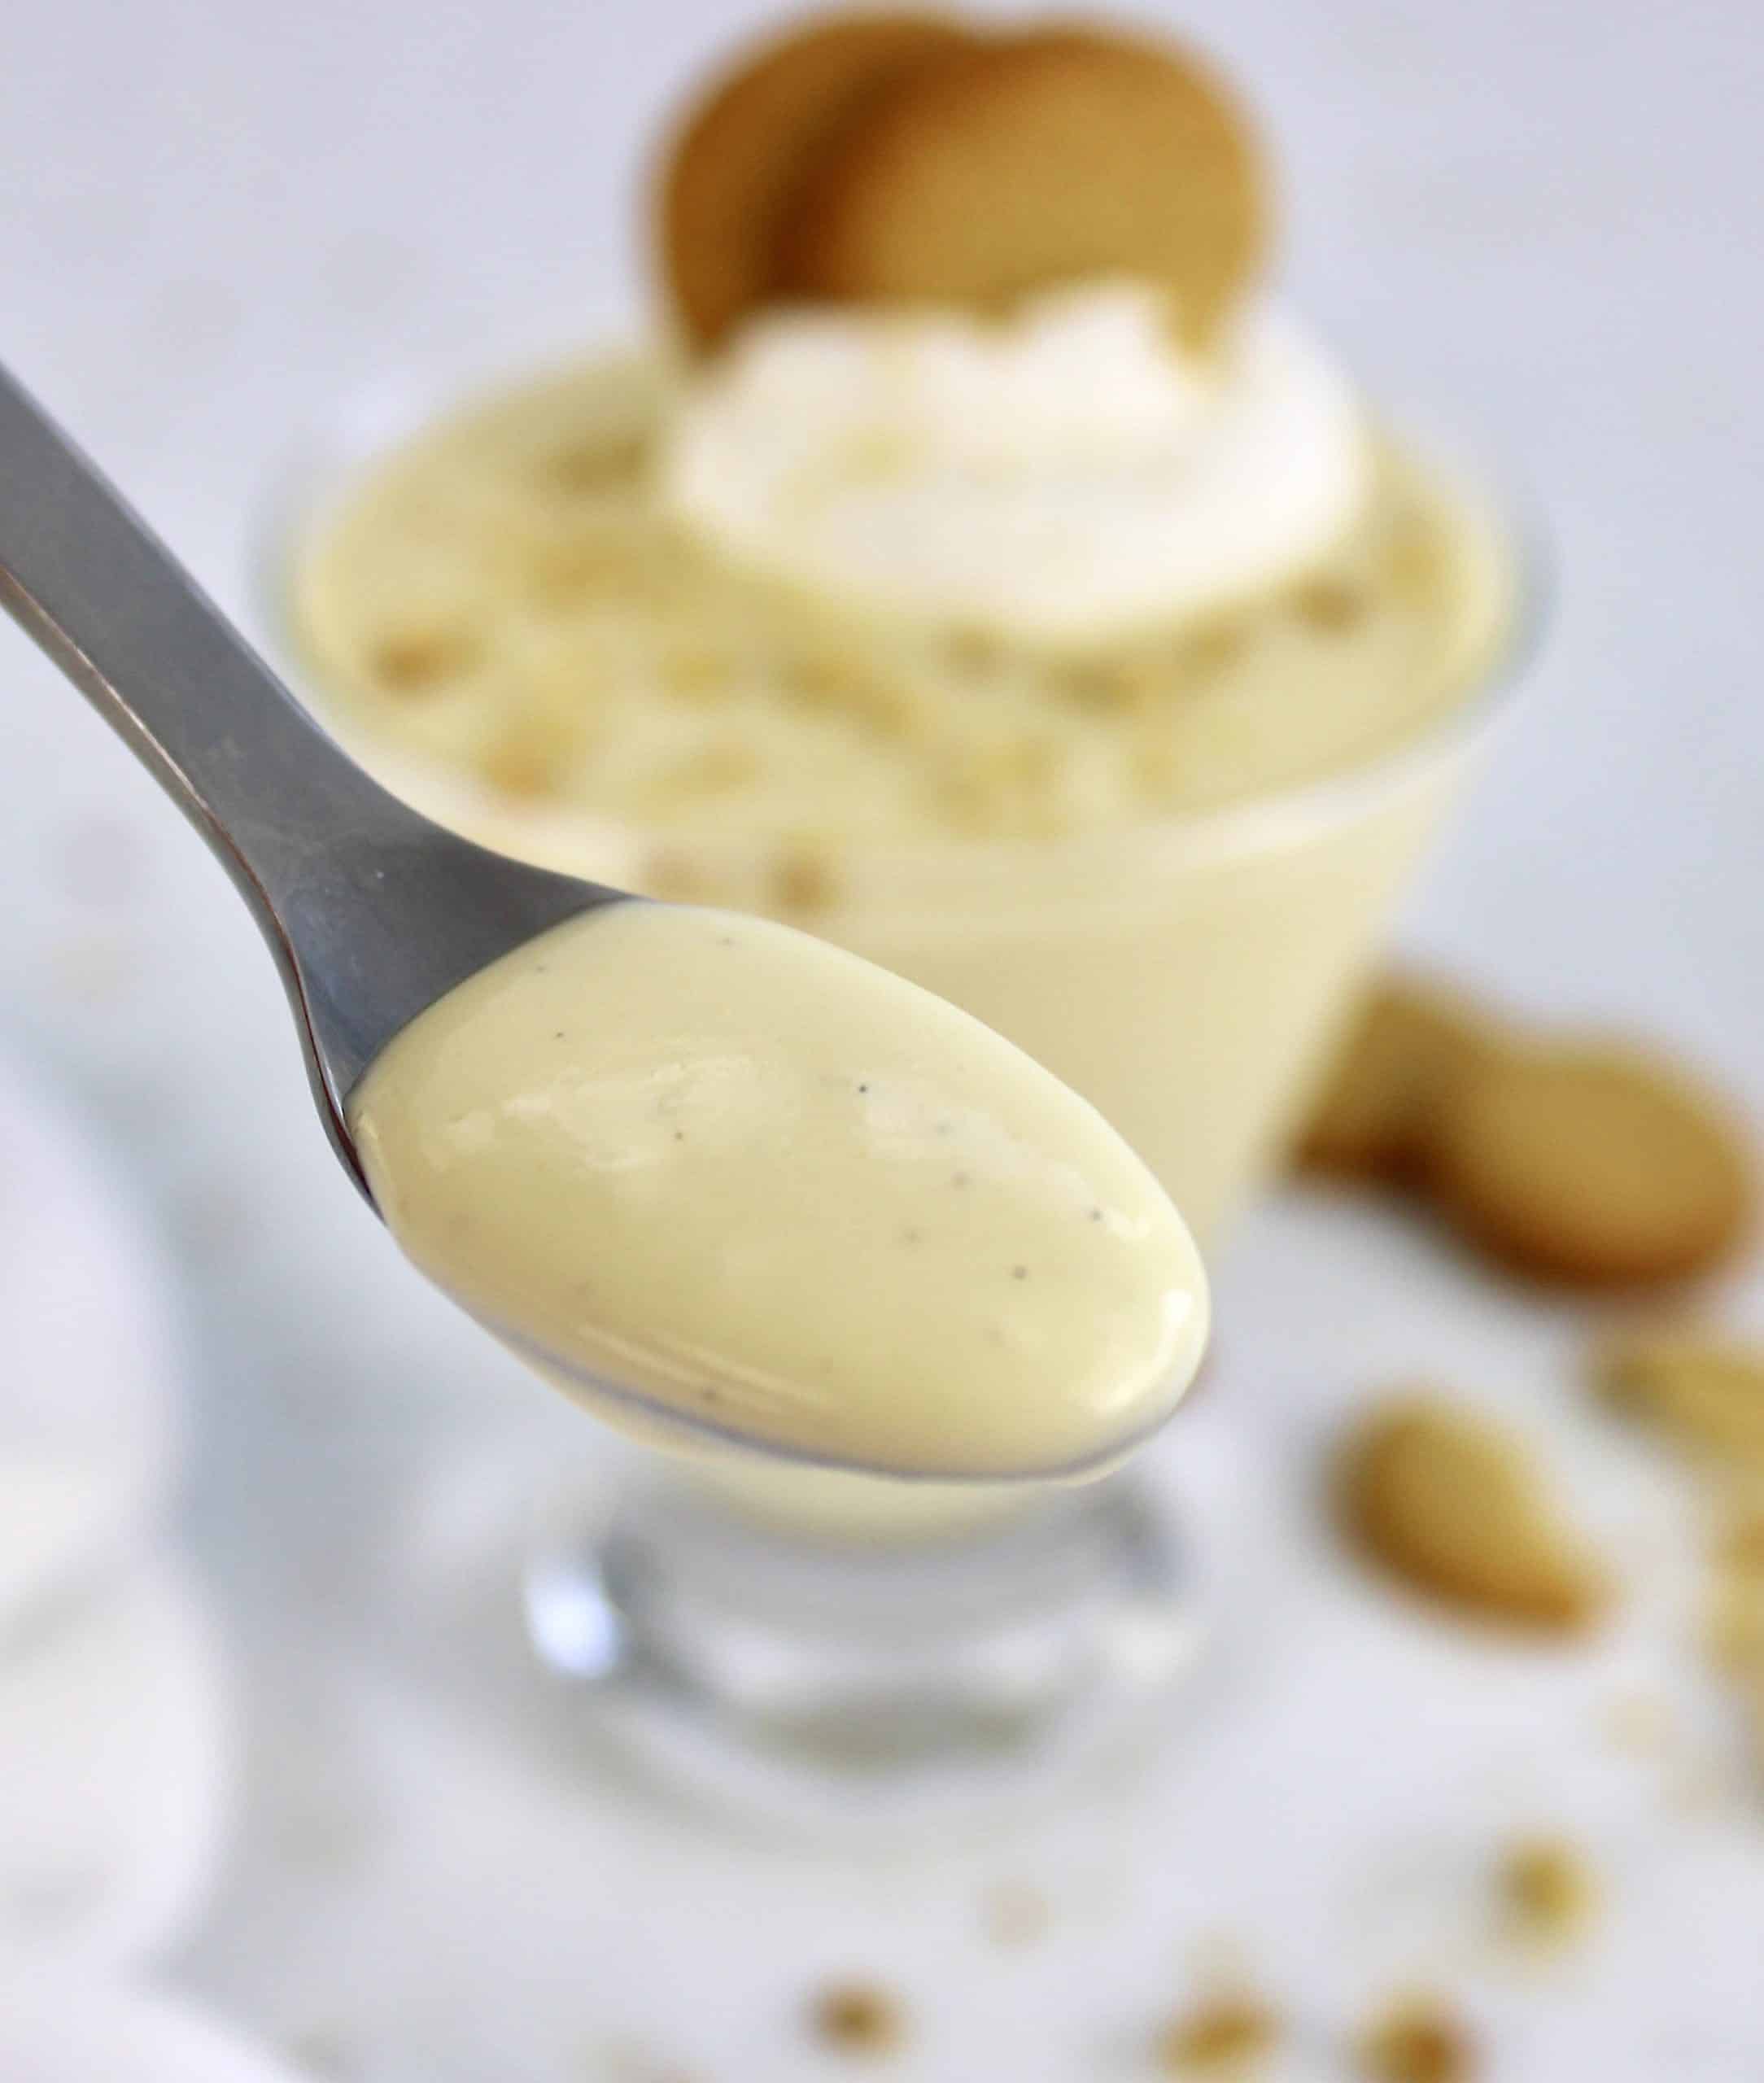 vanilla pudding in spoon with nilla wafer crumbs on top